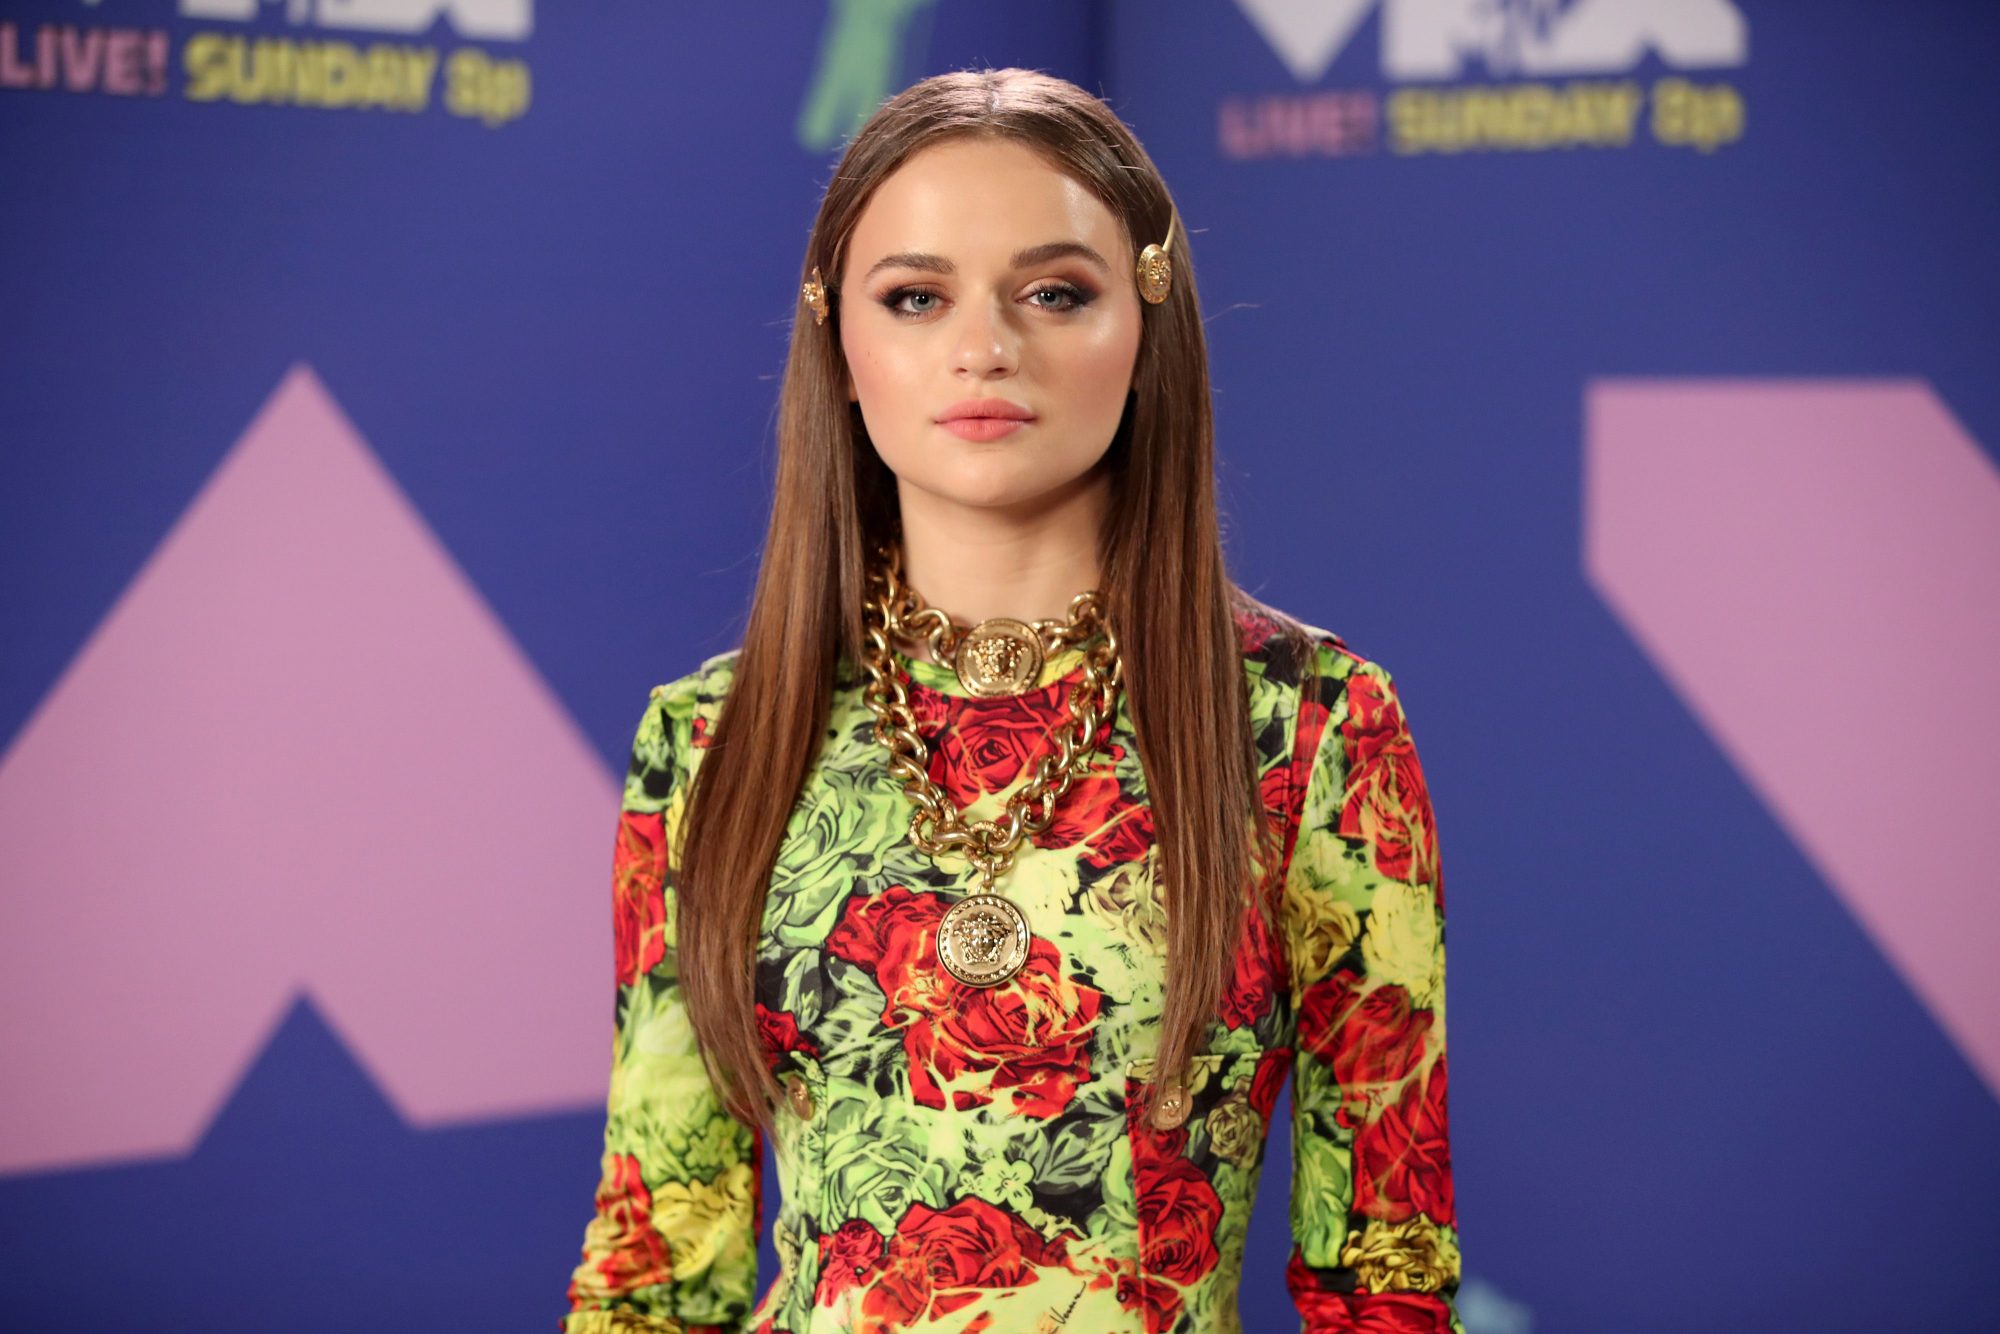 Joey King Opened Up About How Social Media Has Toyed With Her 